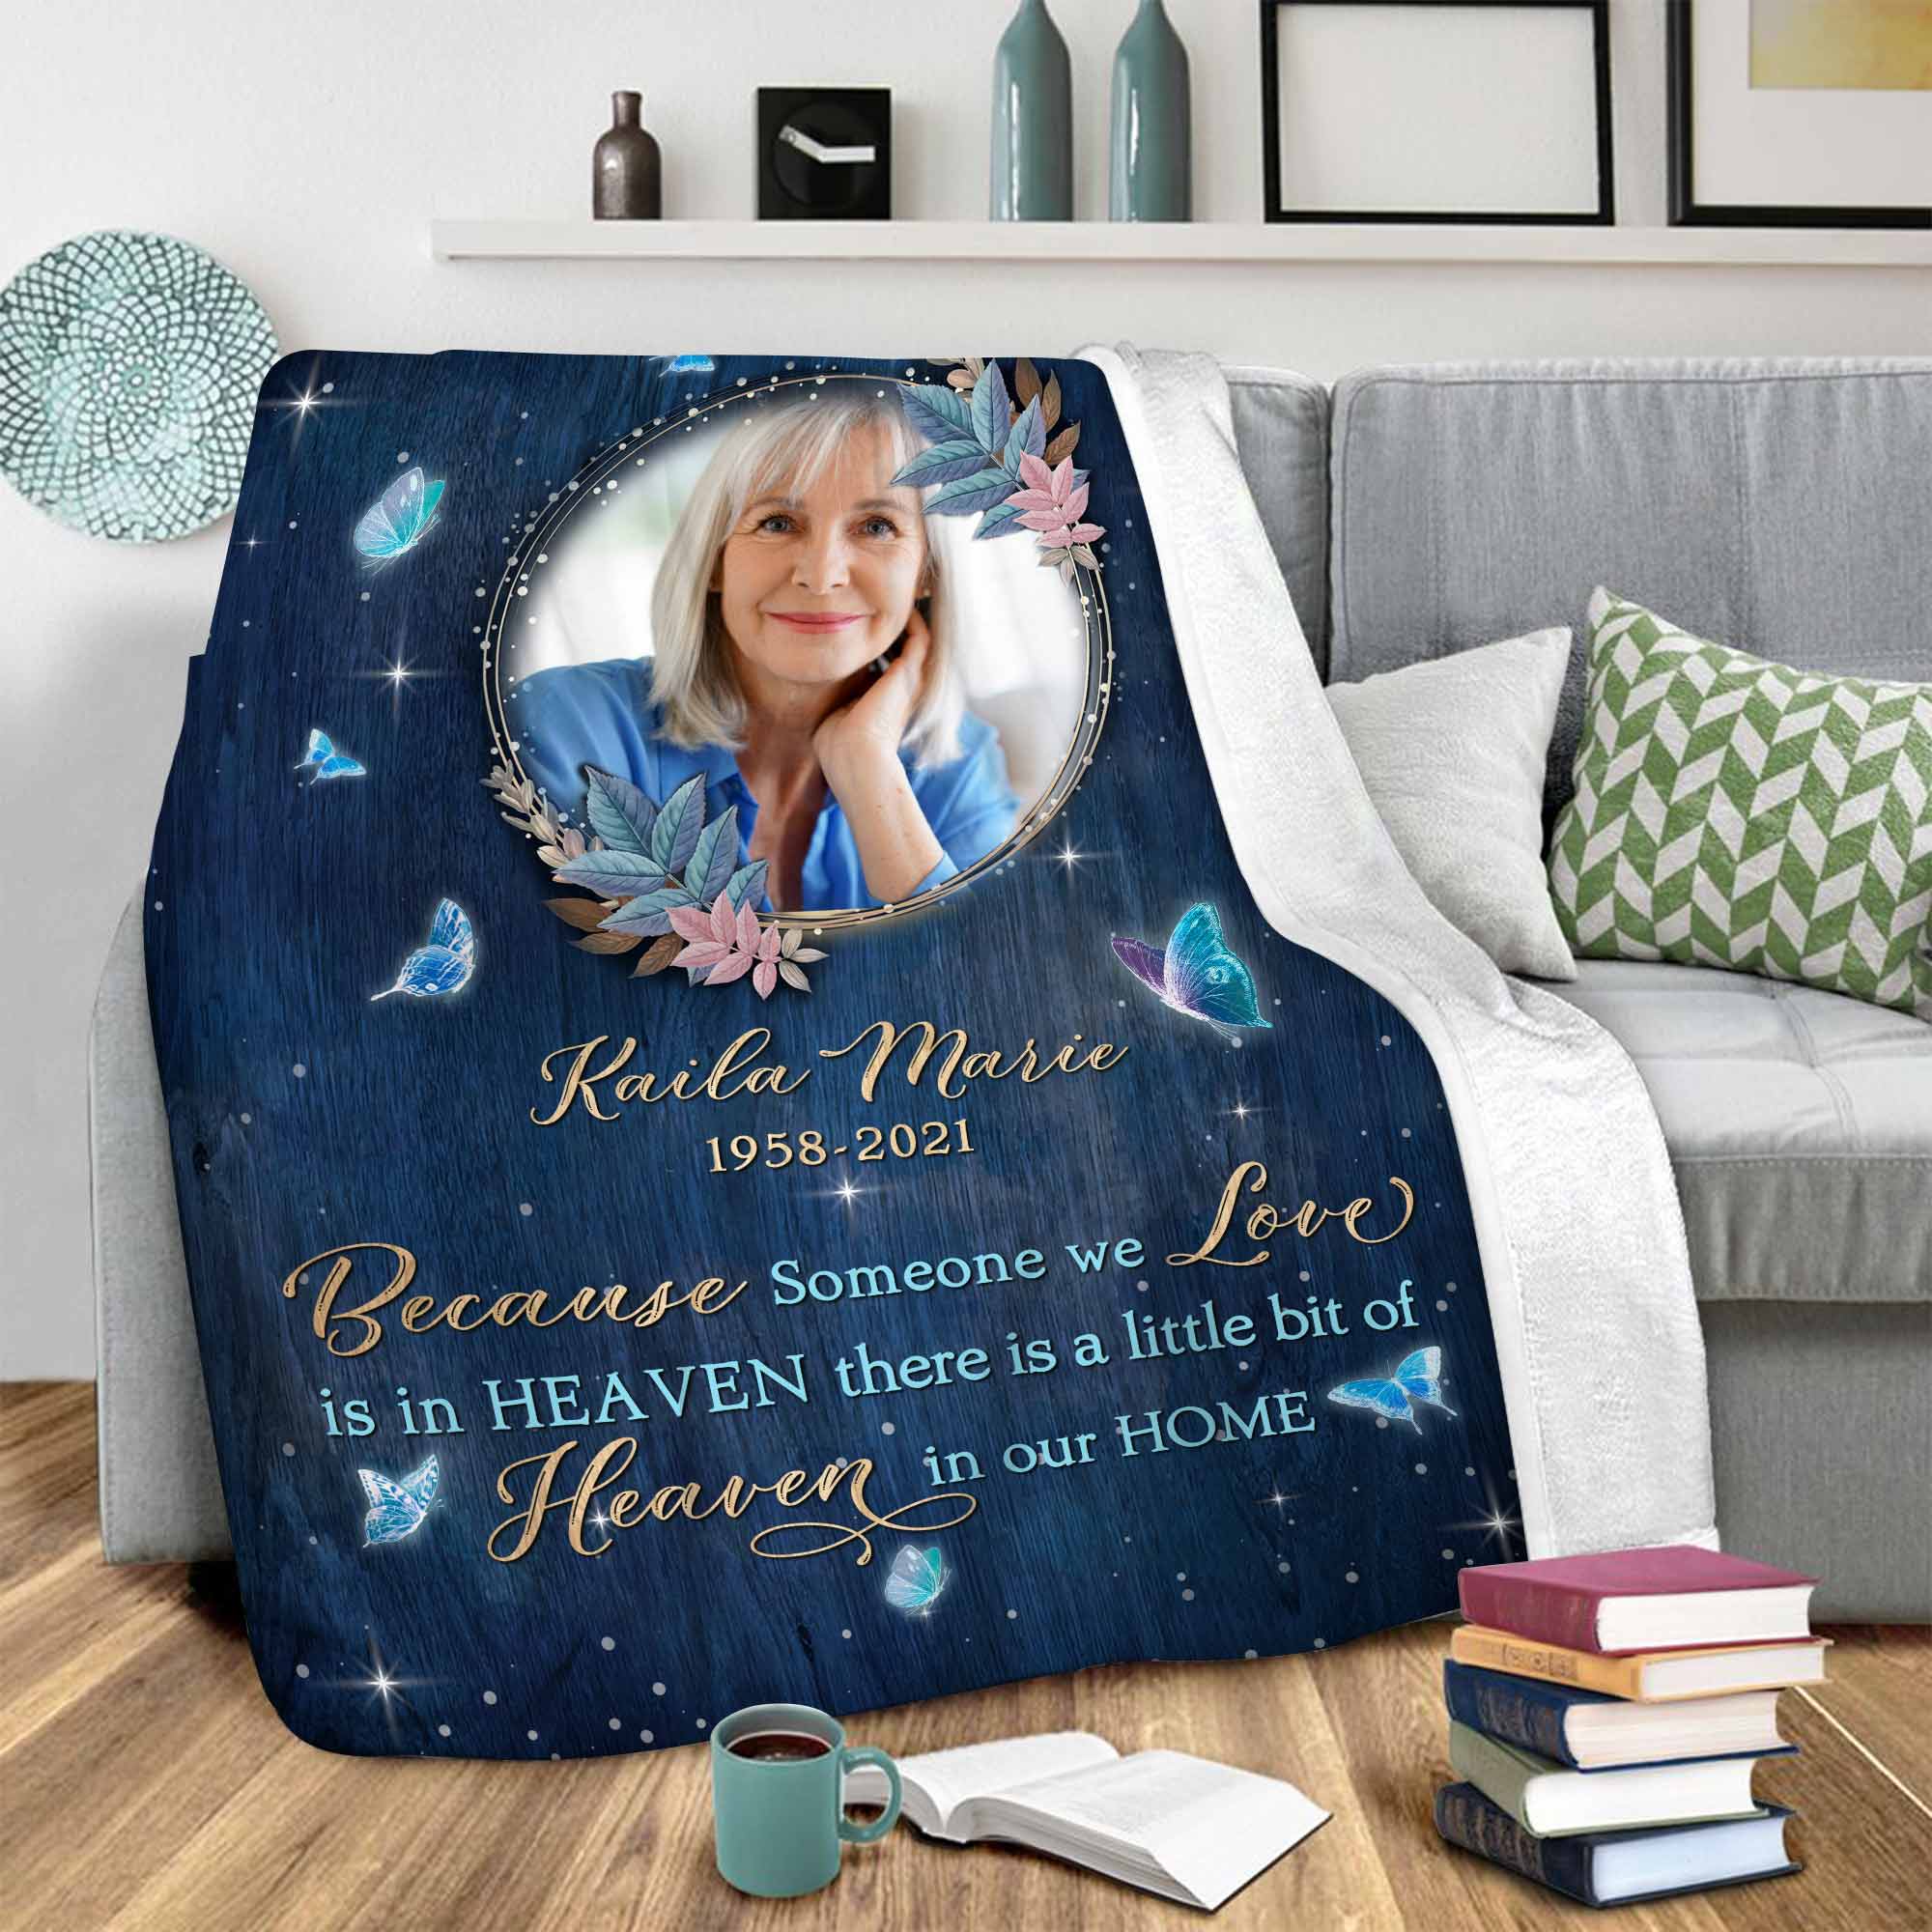 Memorial Blankets With Pictures For Loss Of Mother, Sympathy Blanket For Funeral, Bereavement Blanket